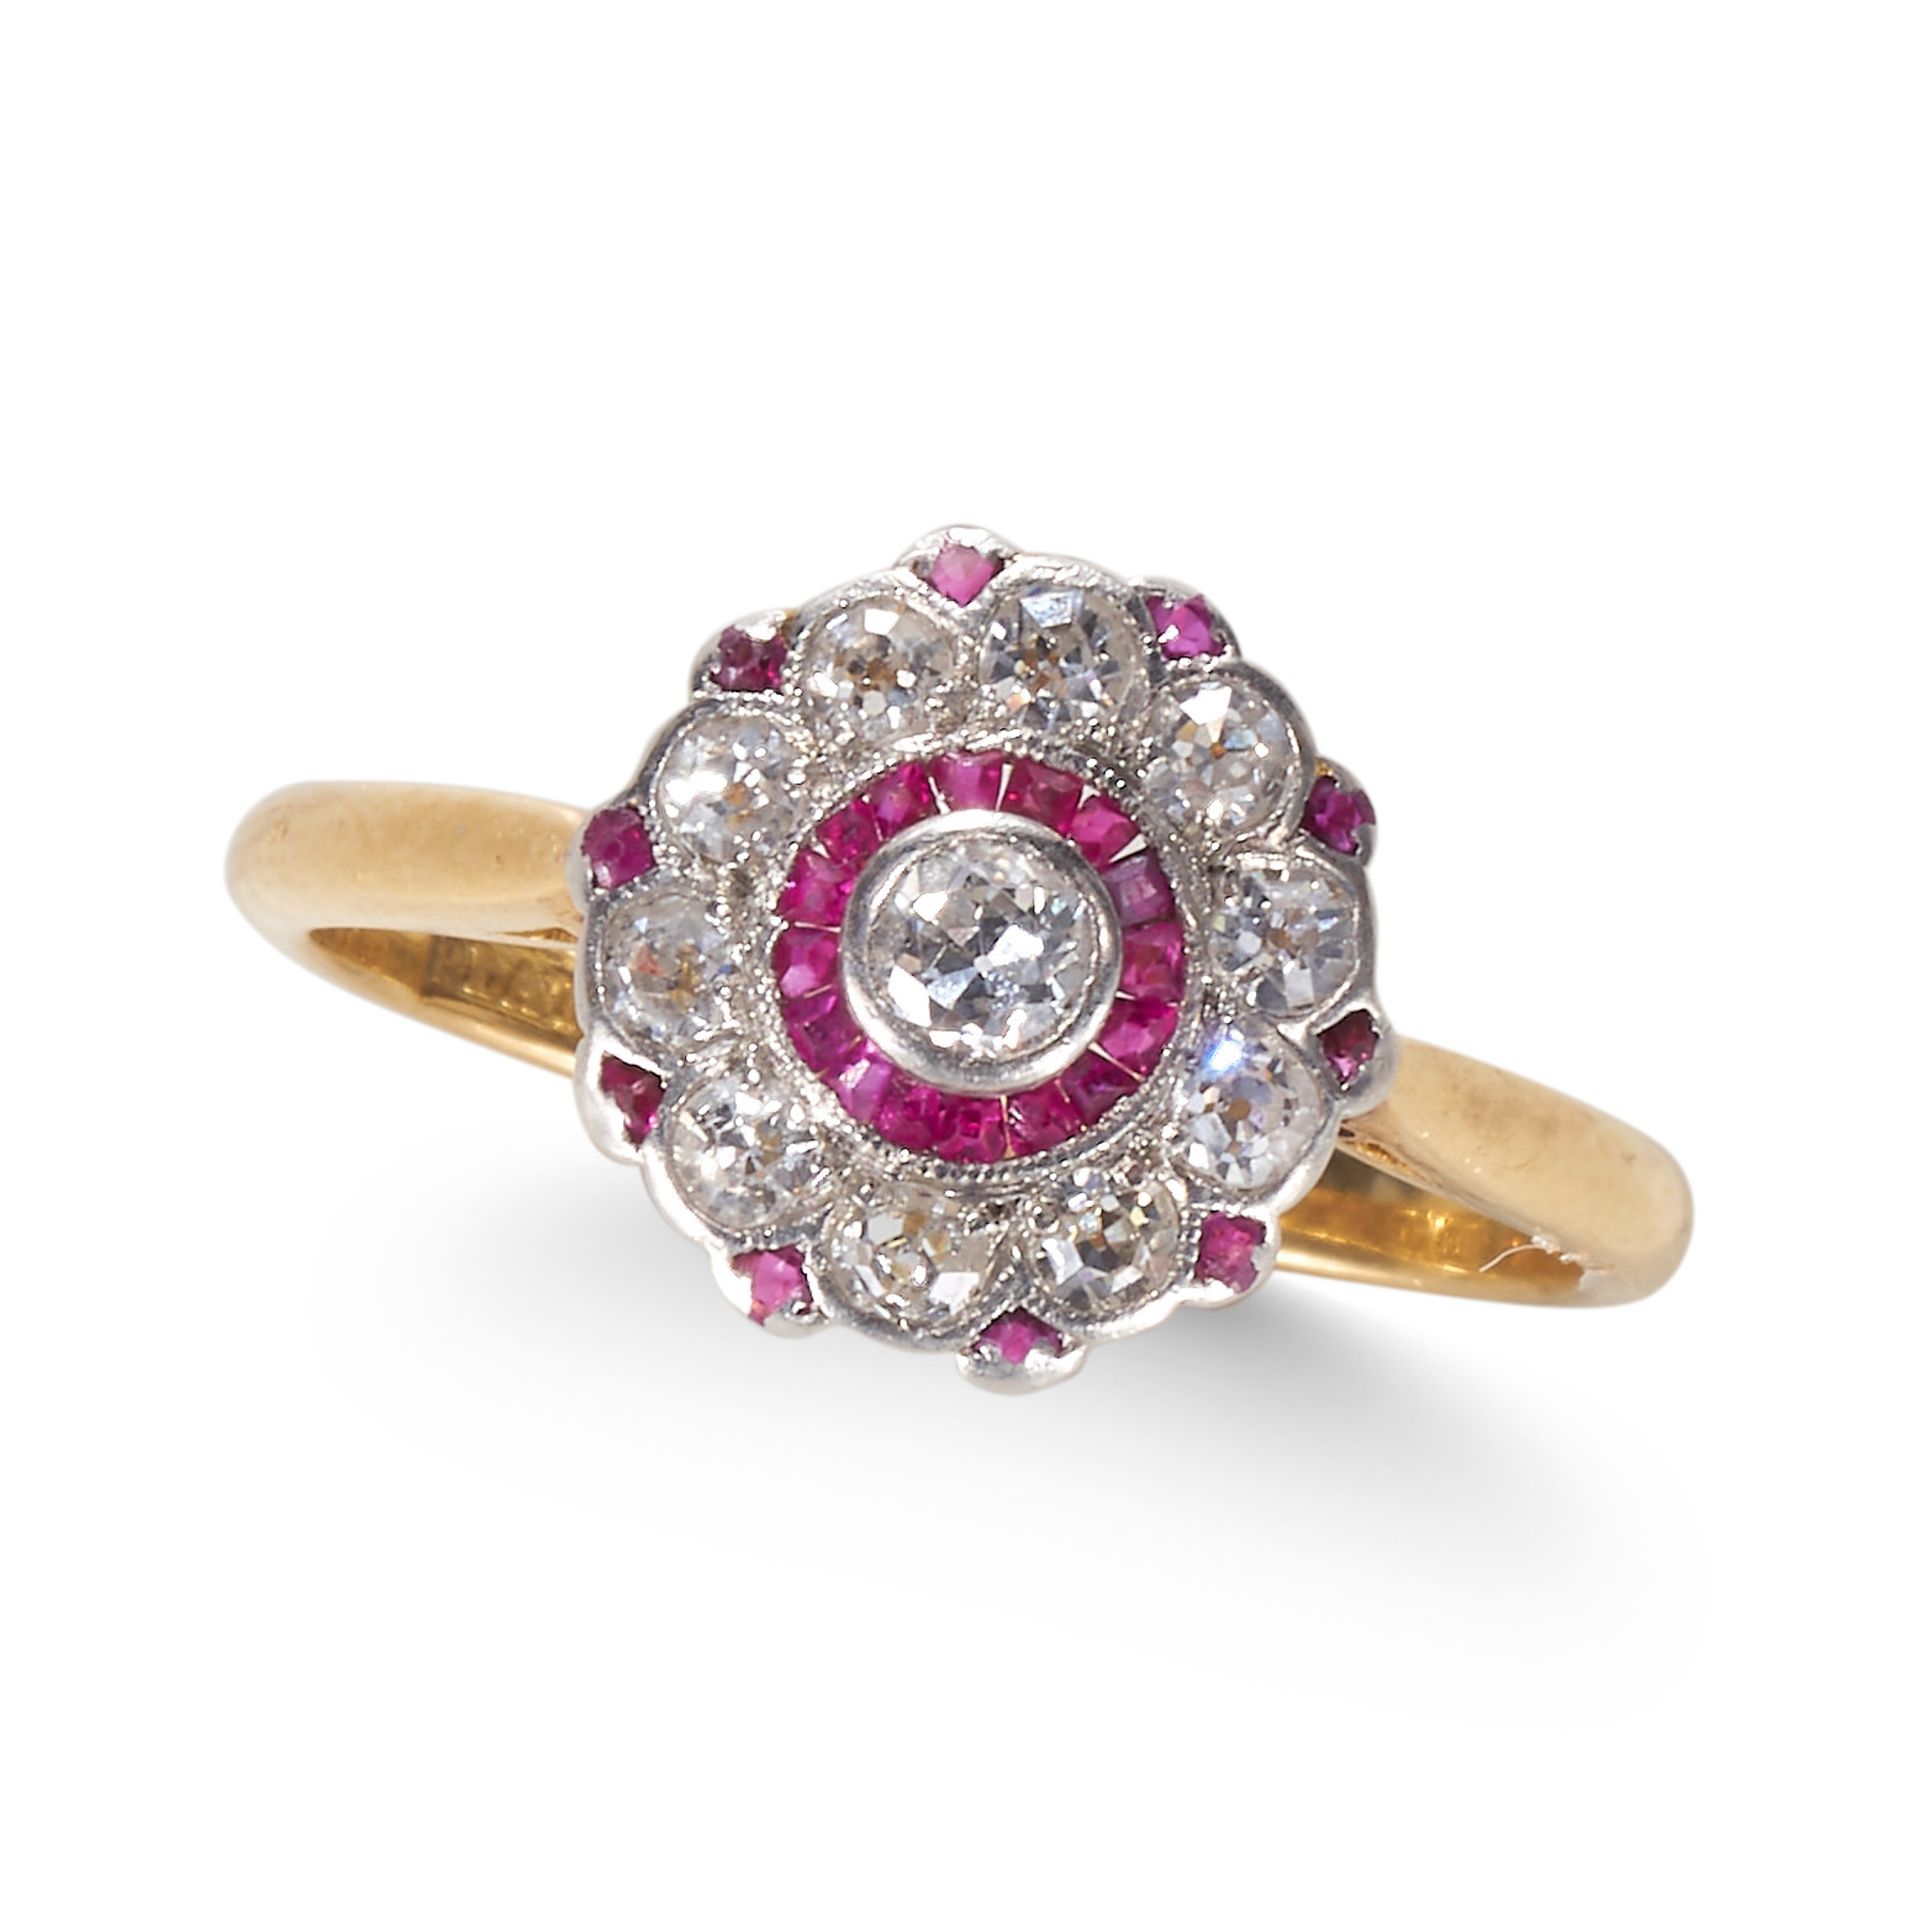 AN ANTIQUE EDWARDIAN, RUBY AND DIAMOND CLUSTER RING, IN 18CT YELLOW GOLD AND PLATINUM.